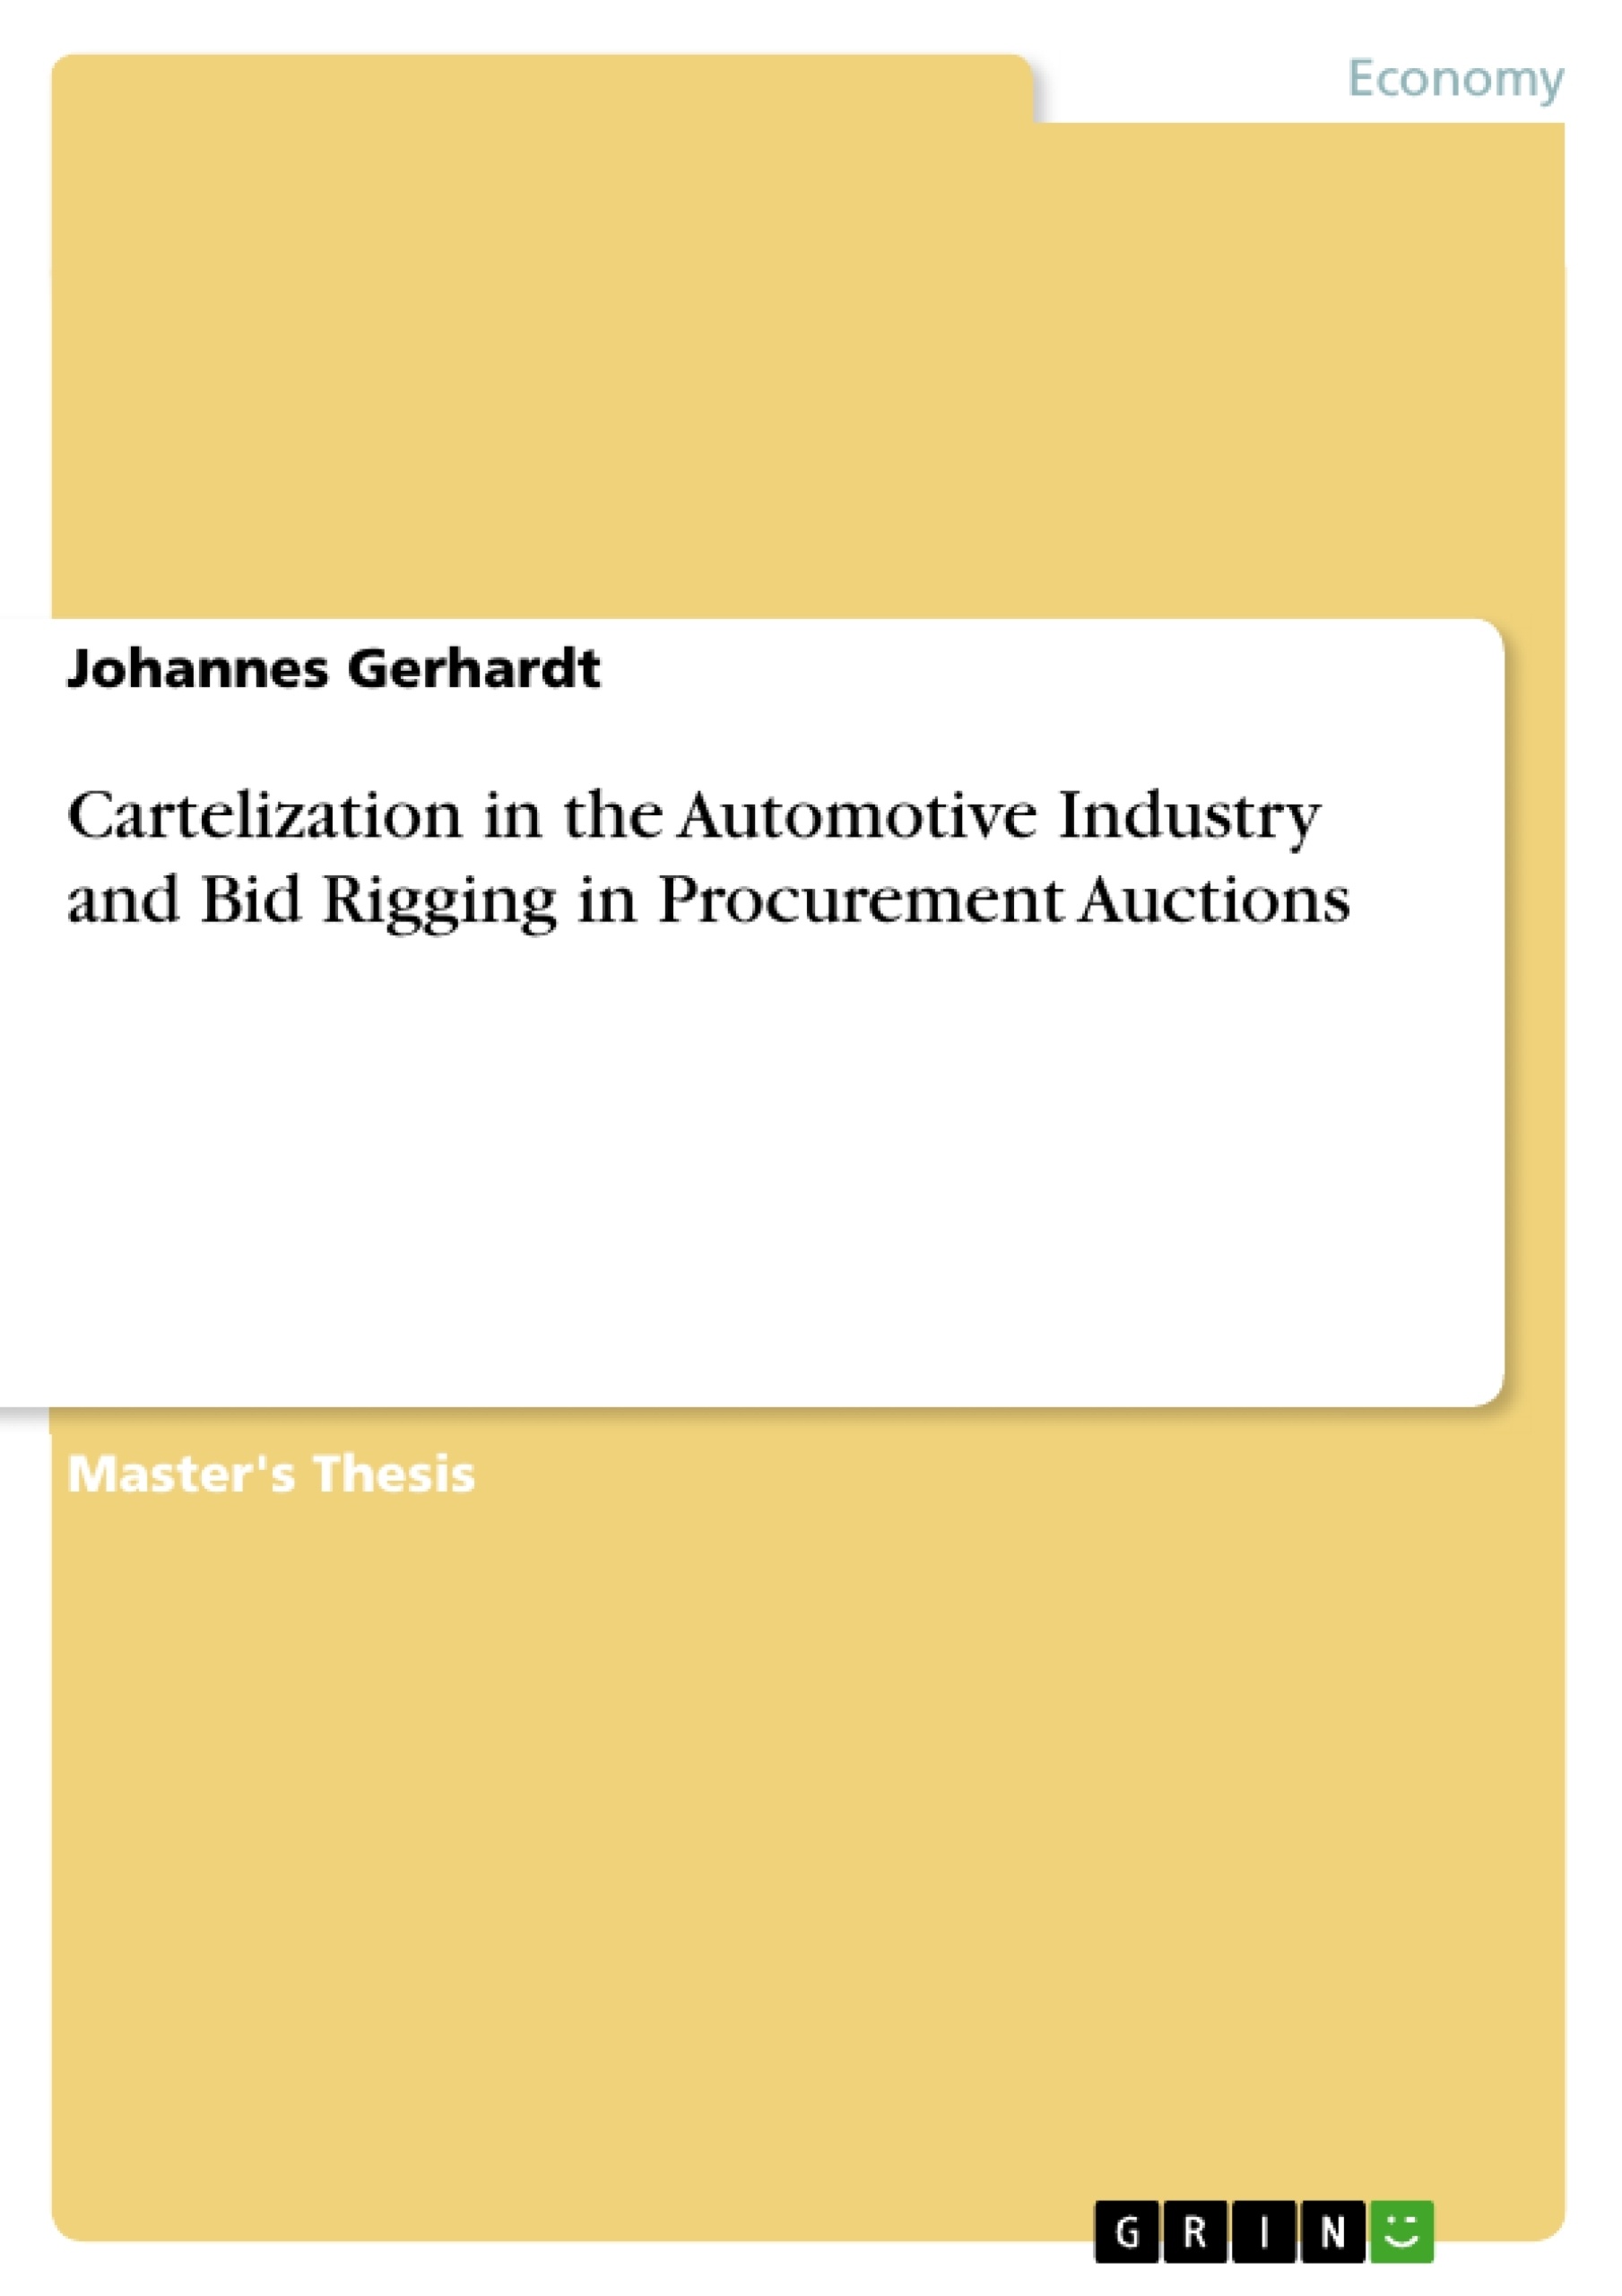 Titre: Cartelization in the Automotive Industry and Bid Rigging in Procurement Auctions